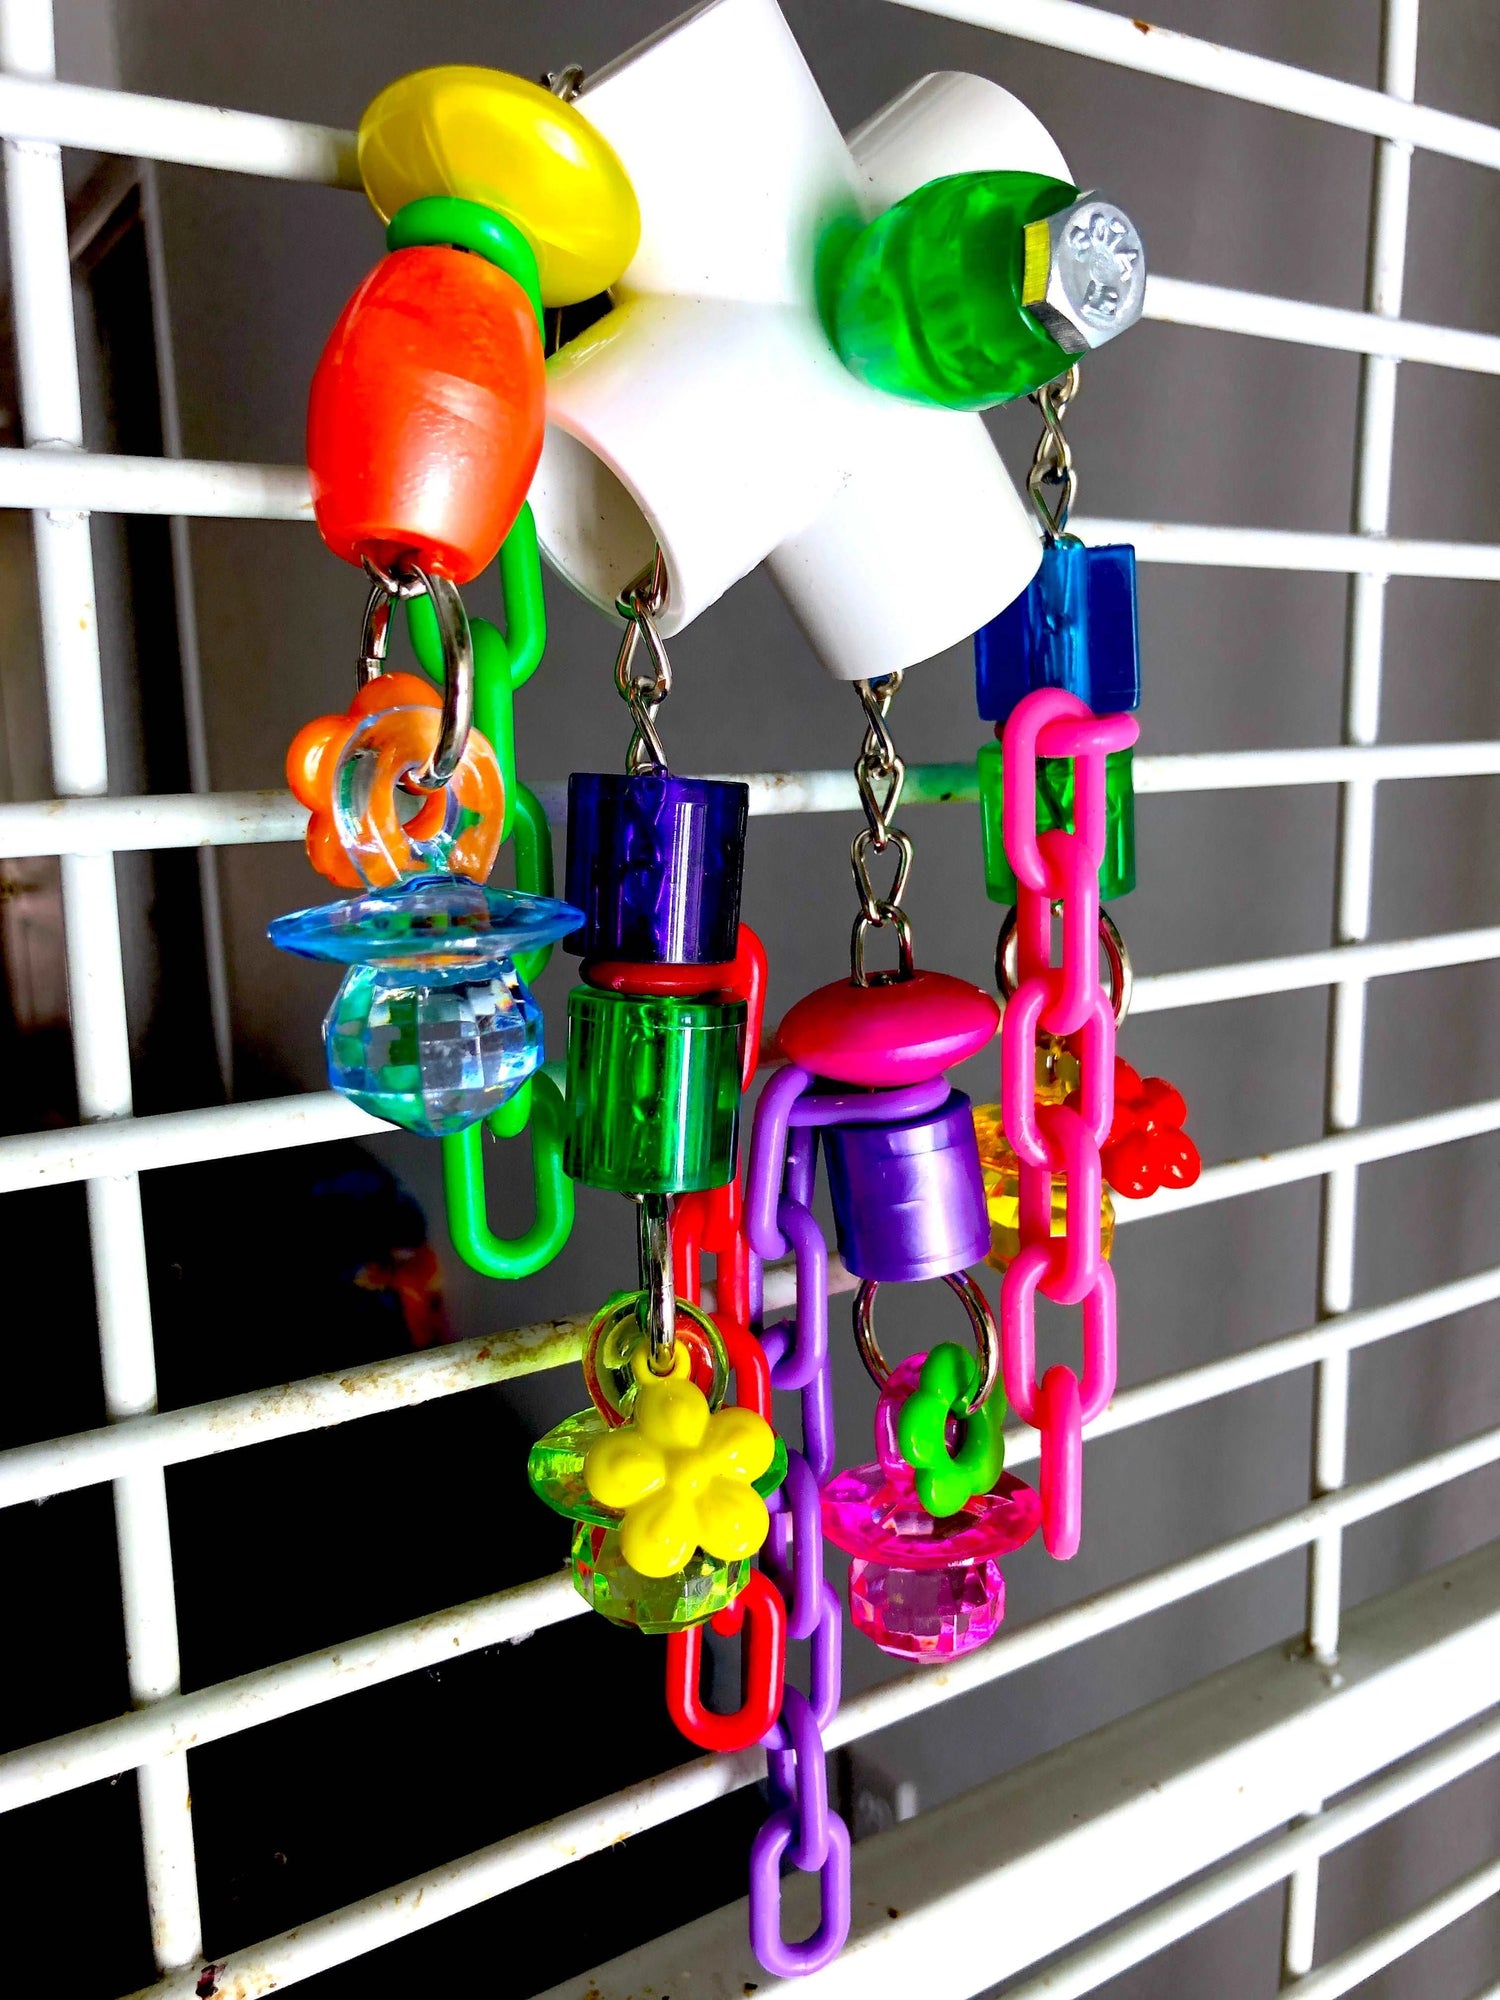 Star steller parrot toy hanging on the side of the cage